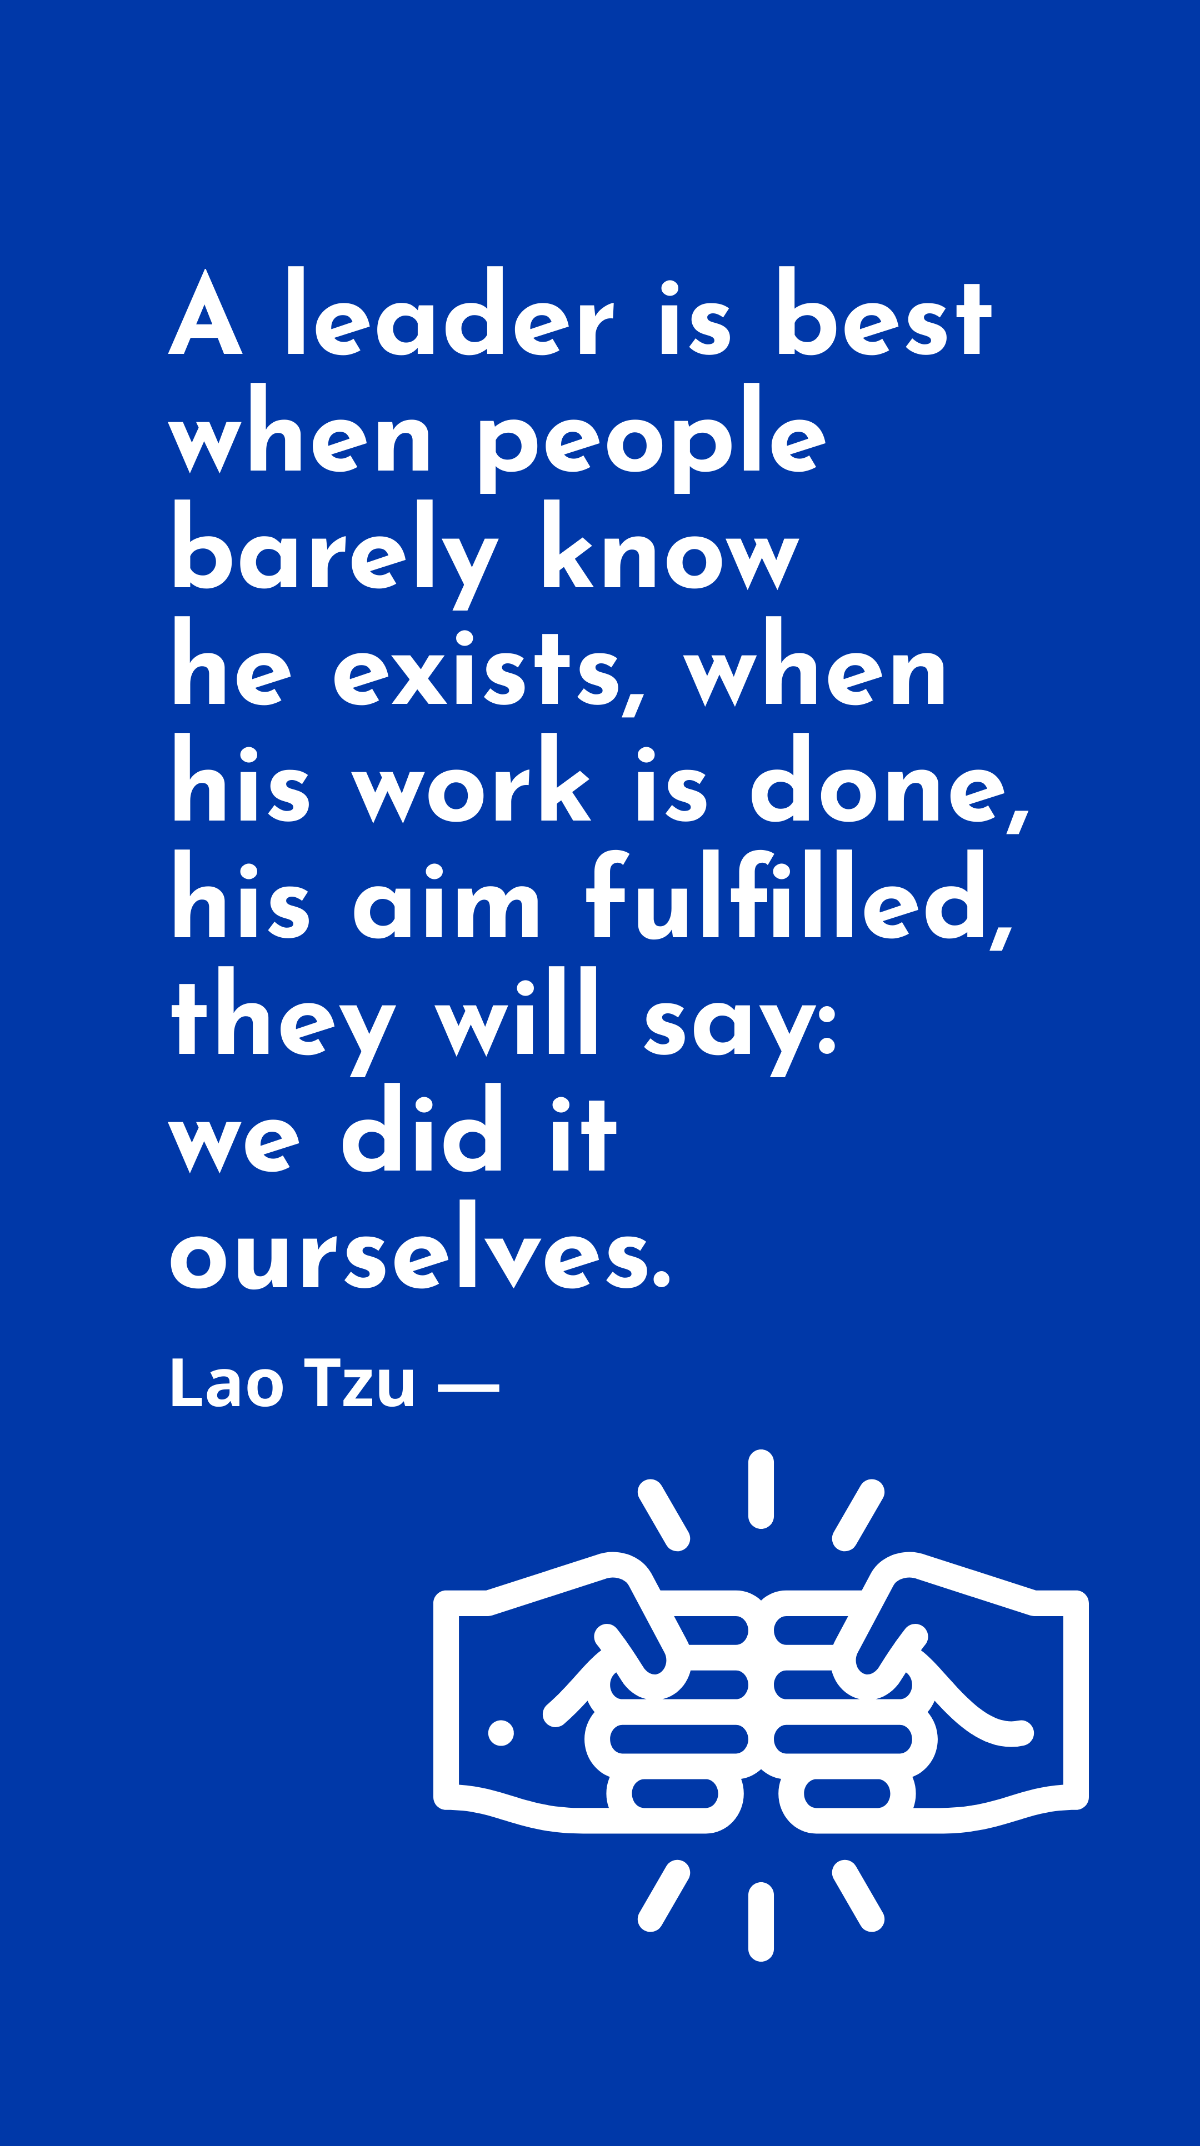 Lao Tzu - A leader is best when people barely know he exists, when his work is done, his aim fulfilled, they will say: we did it ourselves. Template